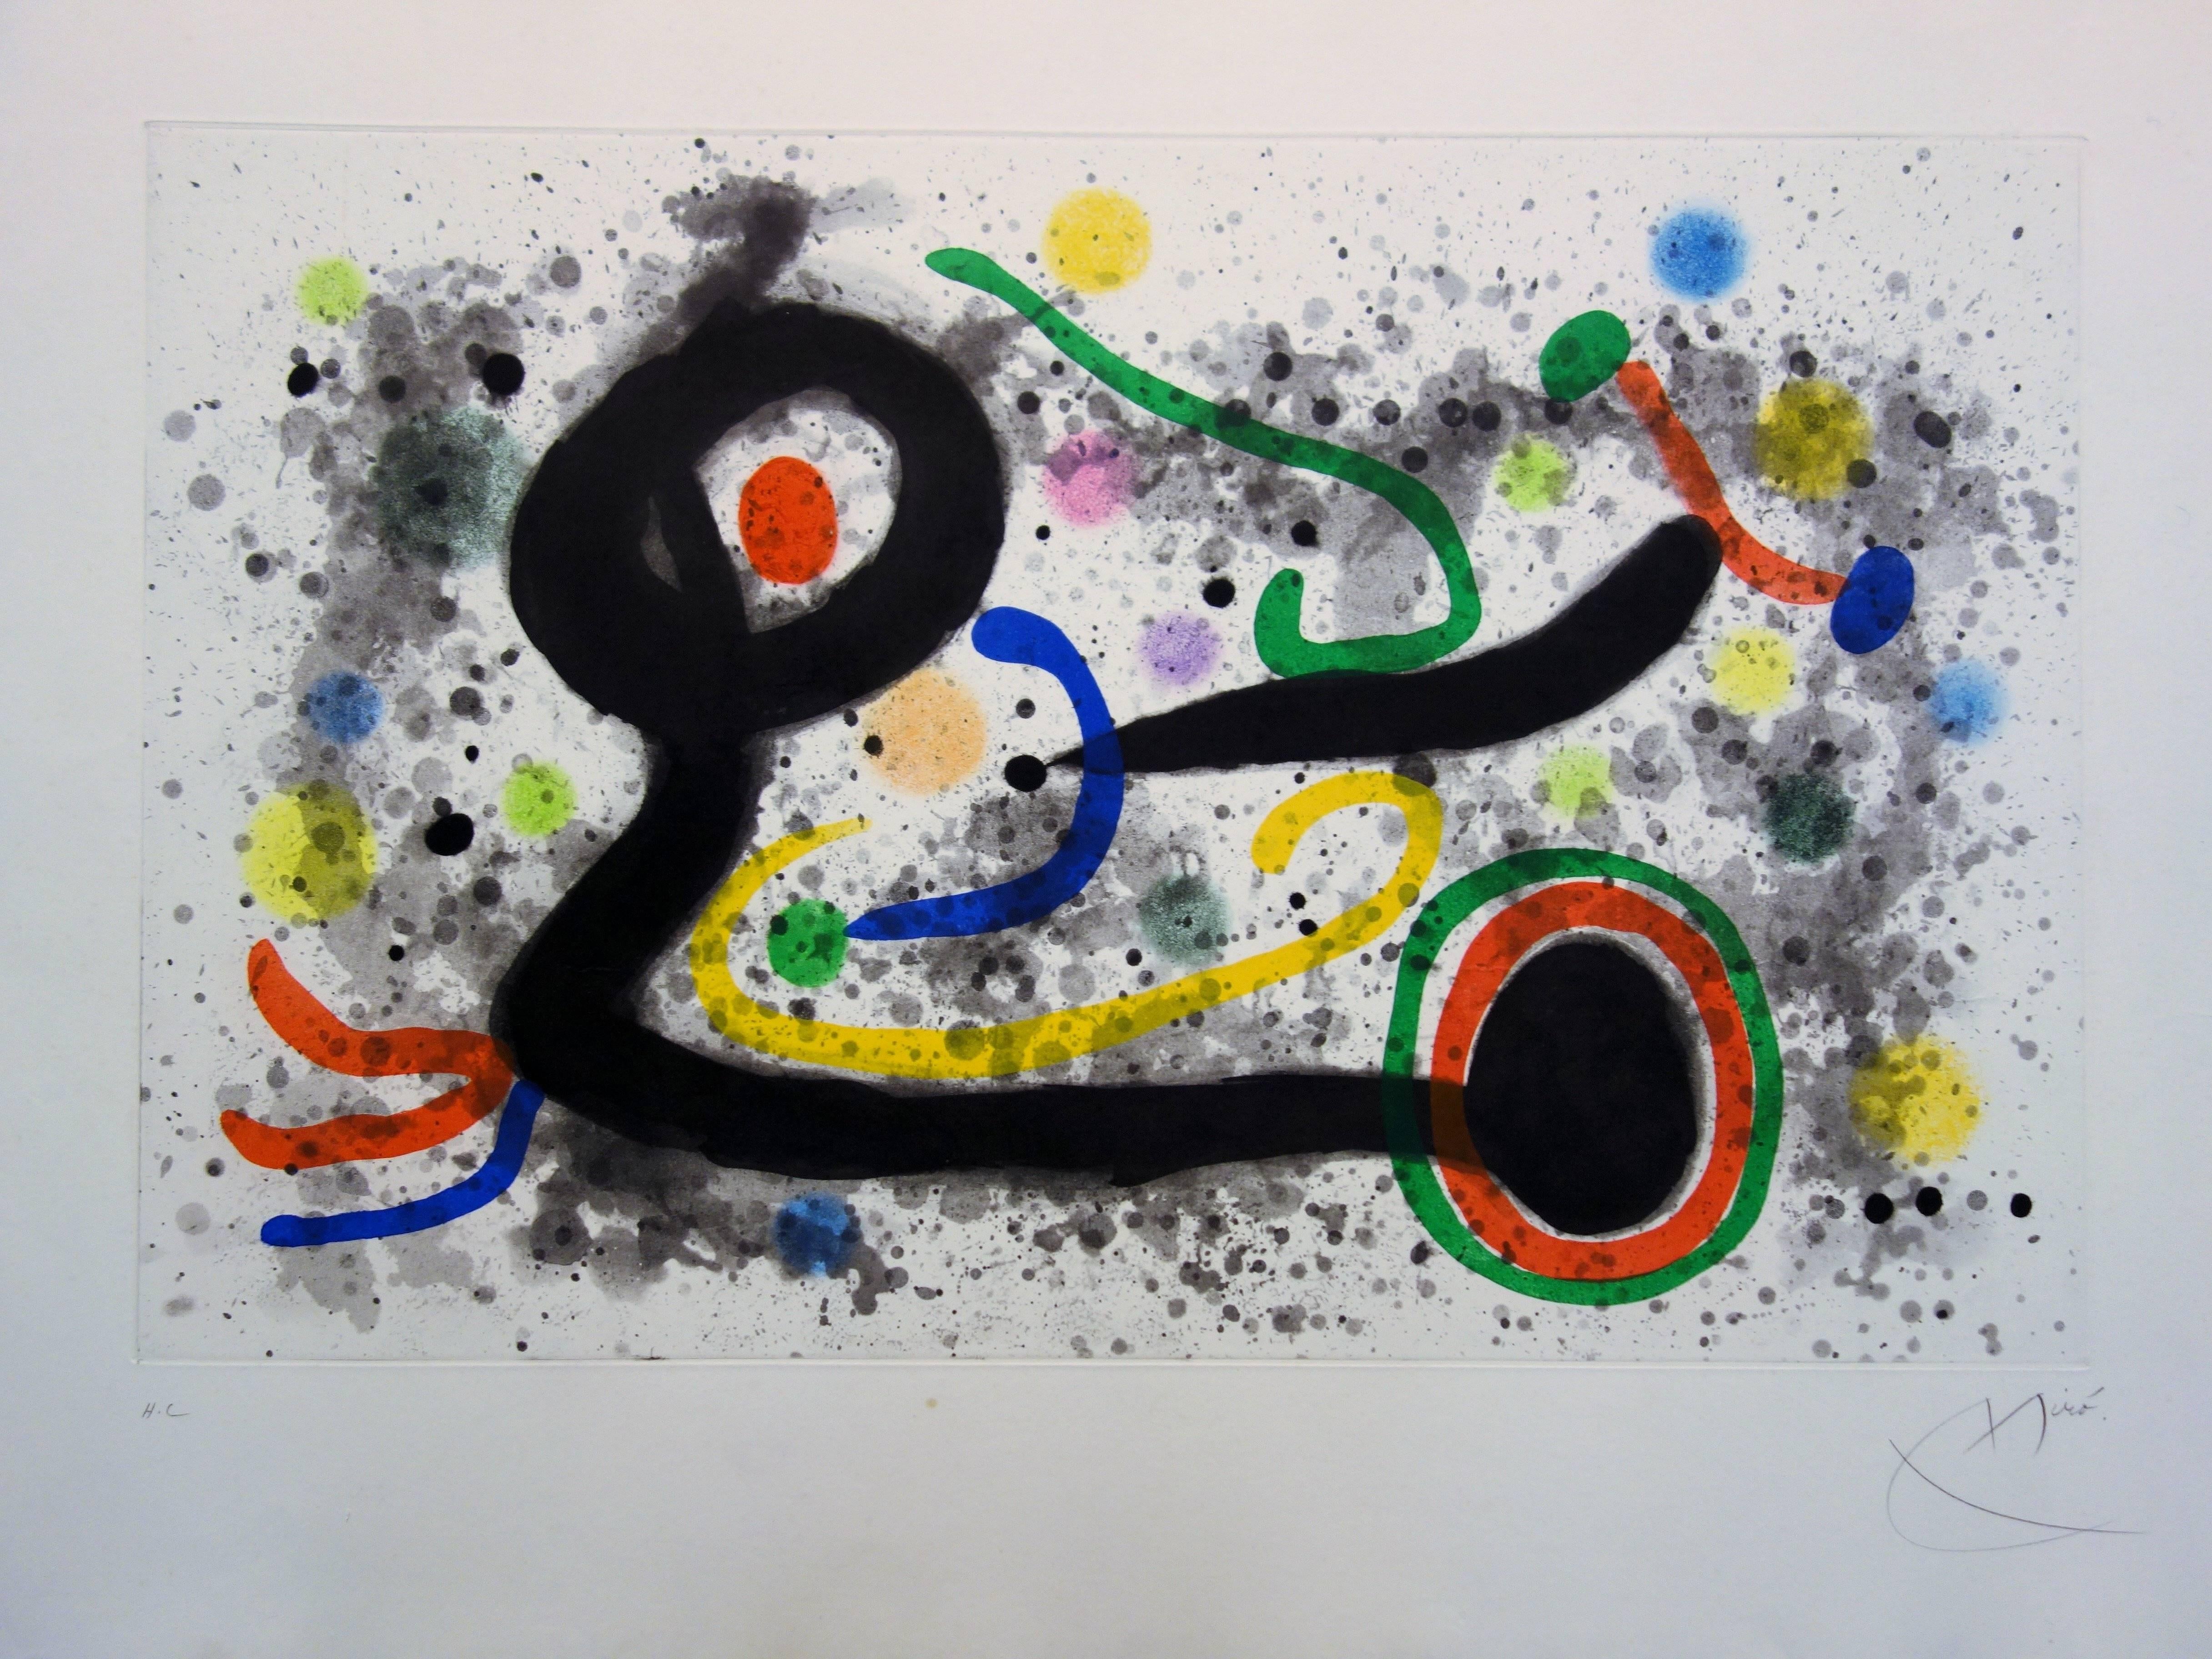 Sous la Grele (Under the Storm) - Original handsigned etching and aquatint, 1969 - Abstract Print by Joan Miró